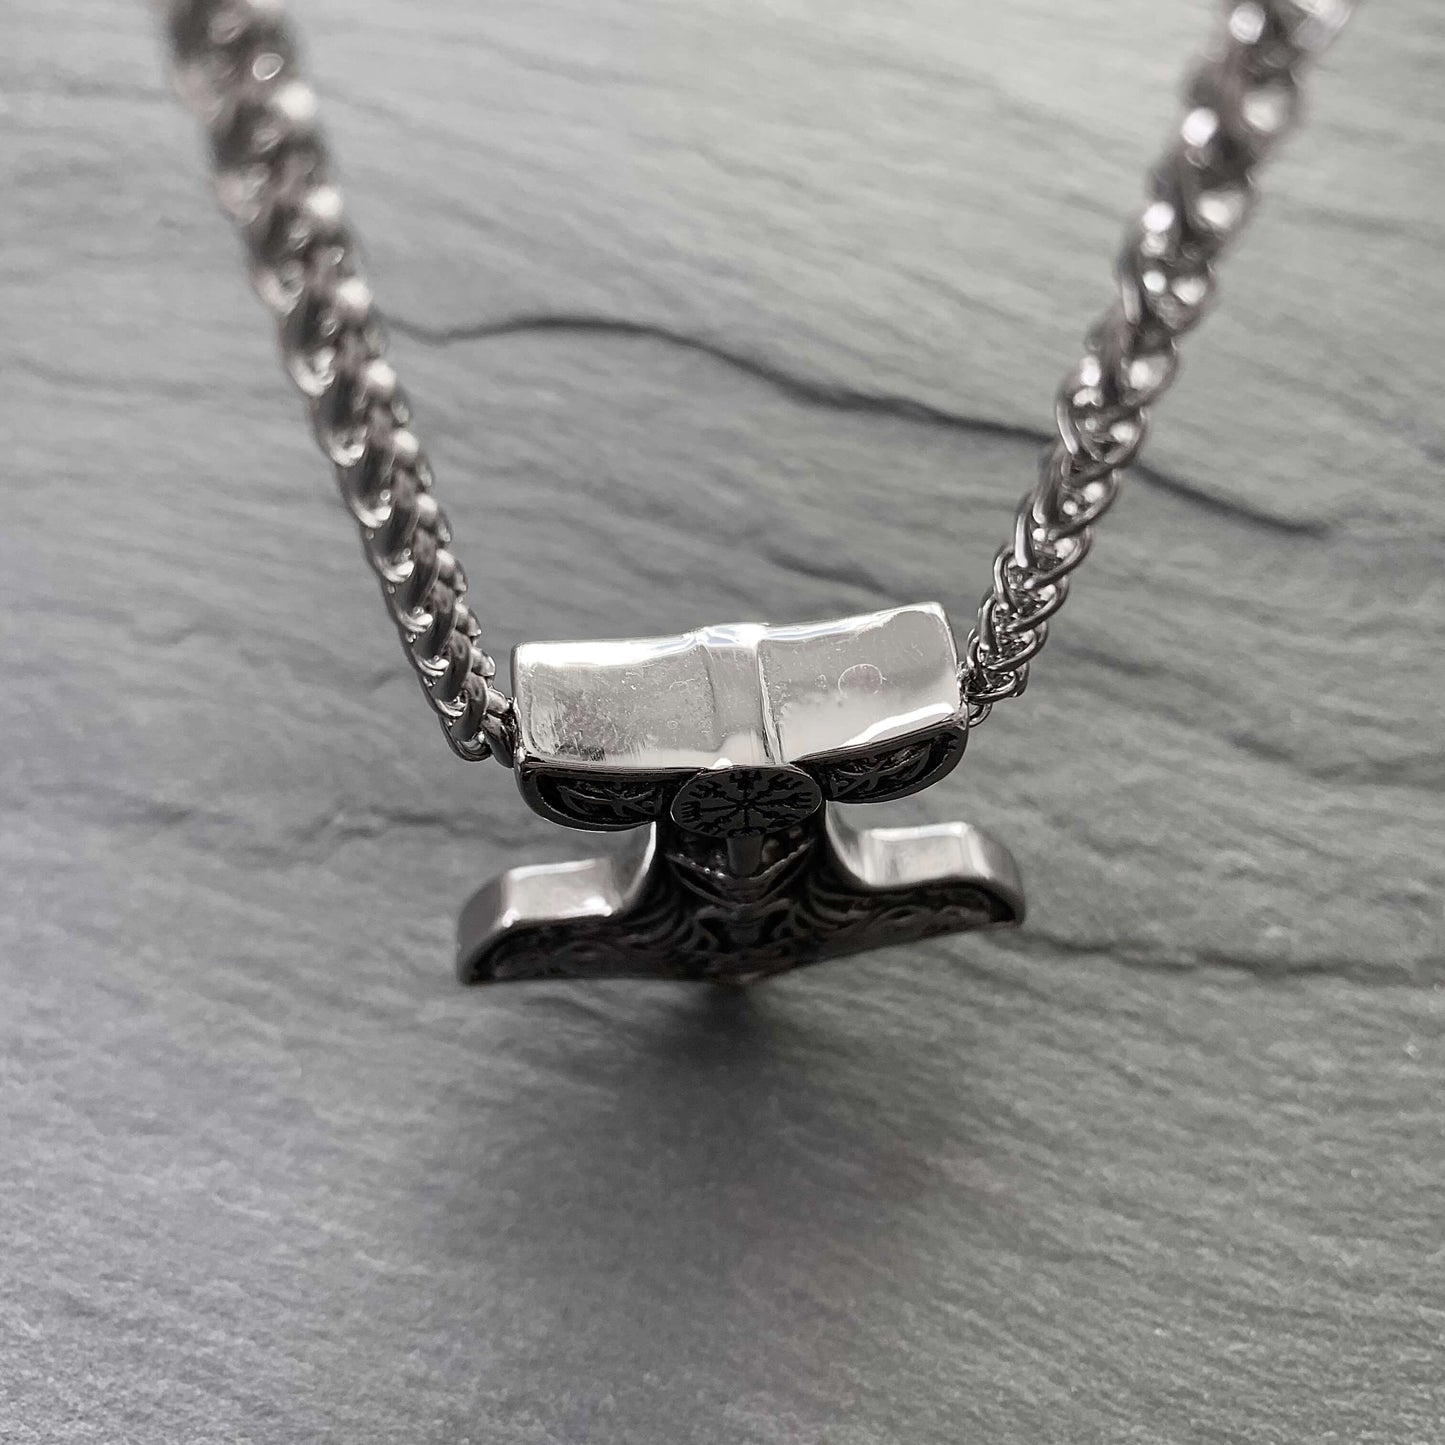 Viking Anchor Necklace